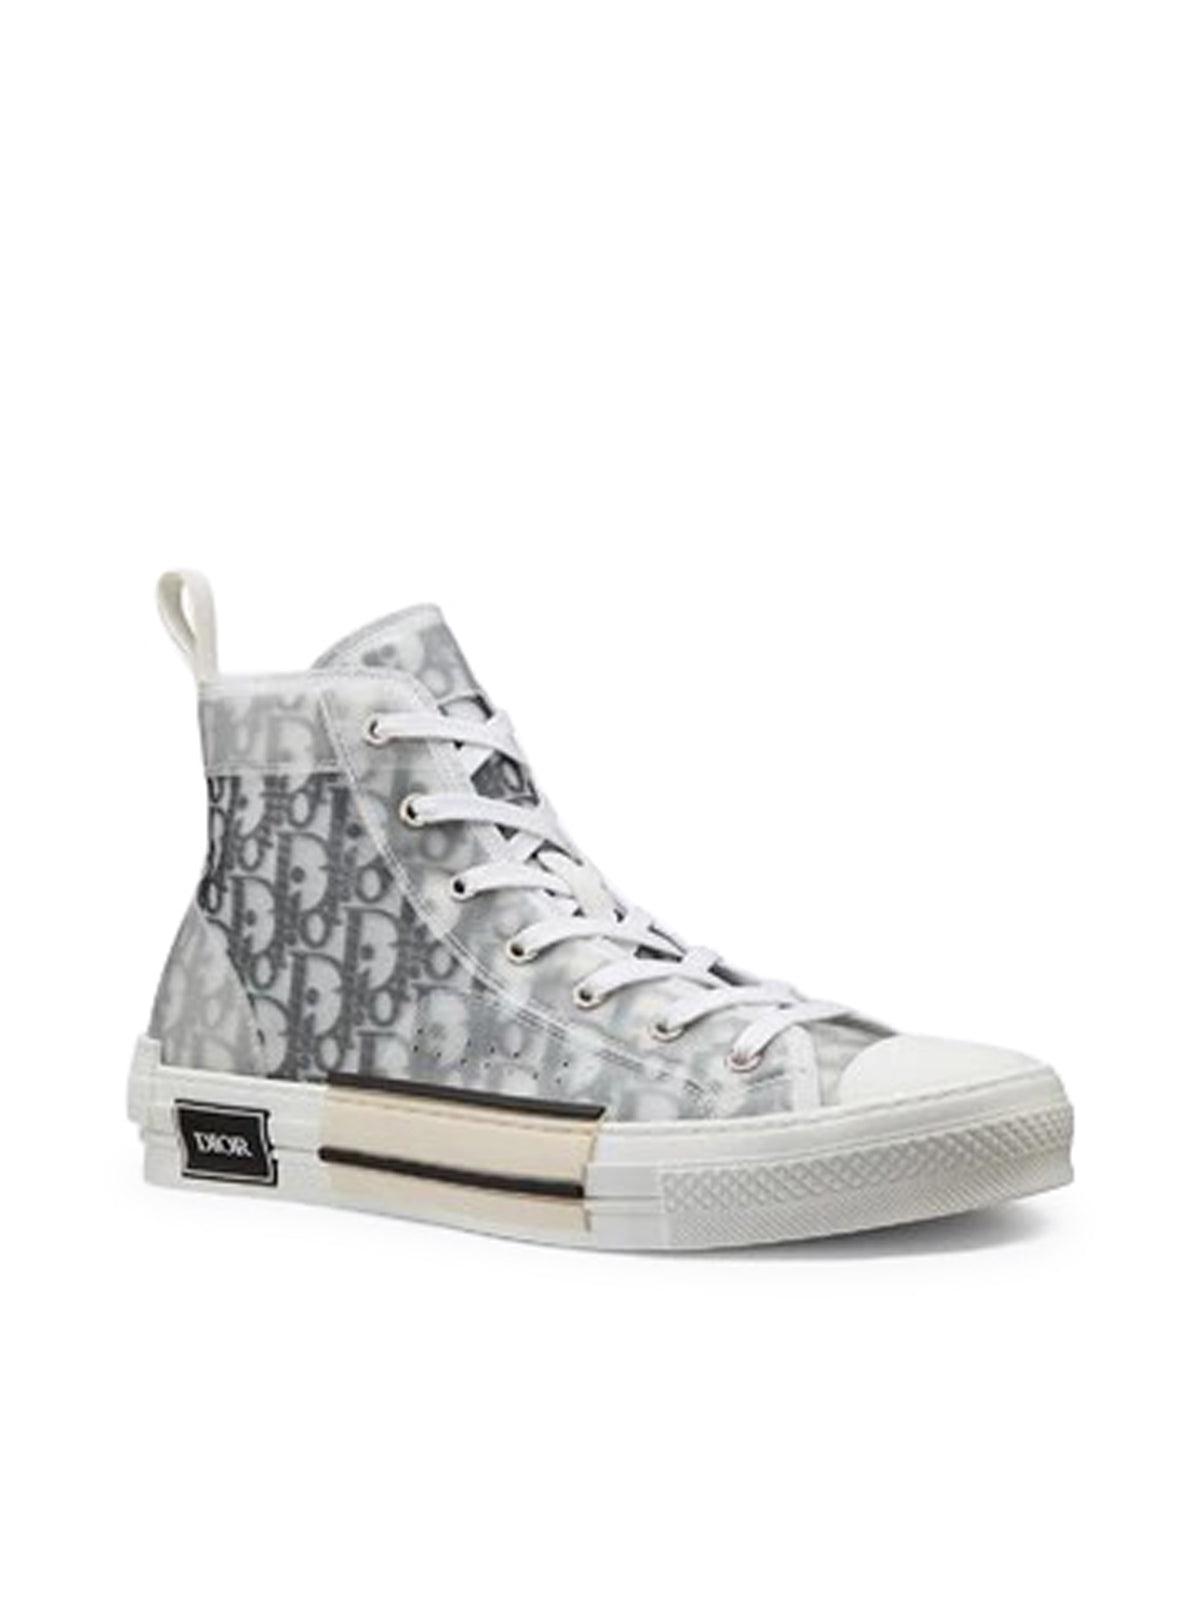 Dior B23 High-top Sneakers In Dior Oblique for Men | Lyst